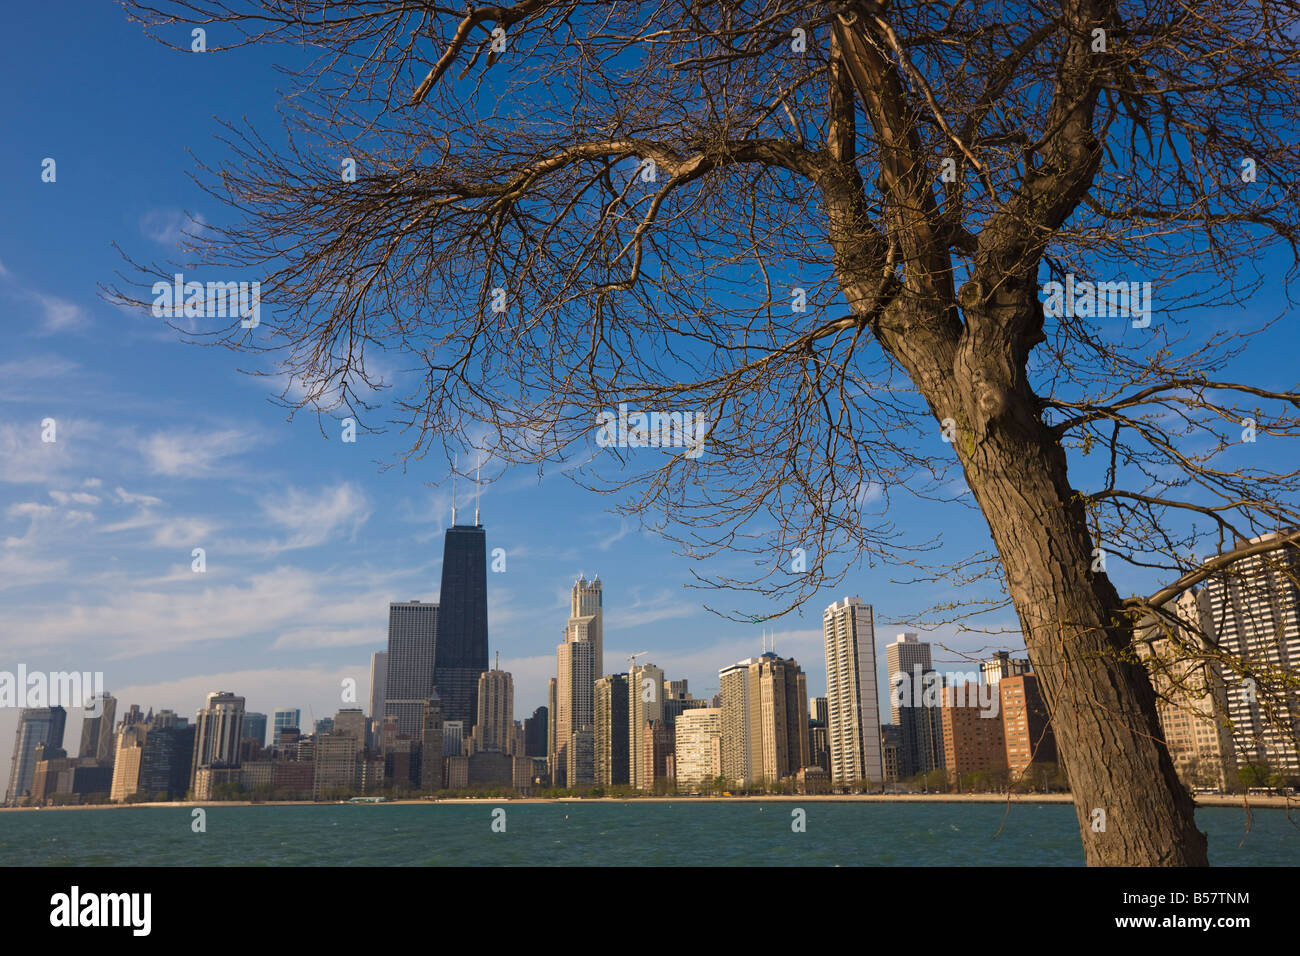 Near North city skyline and Hancock Tower, early morning, Chicago, Illinois, United States of America, North America Stock Photo